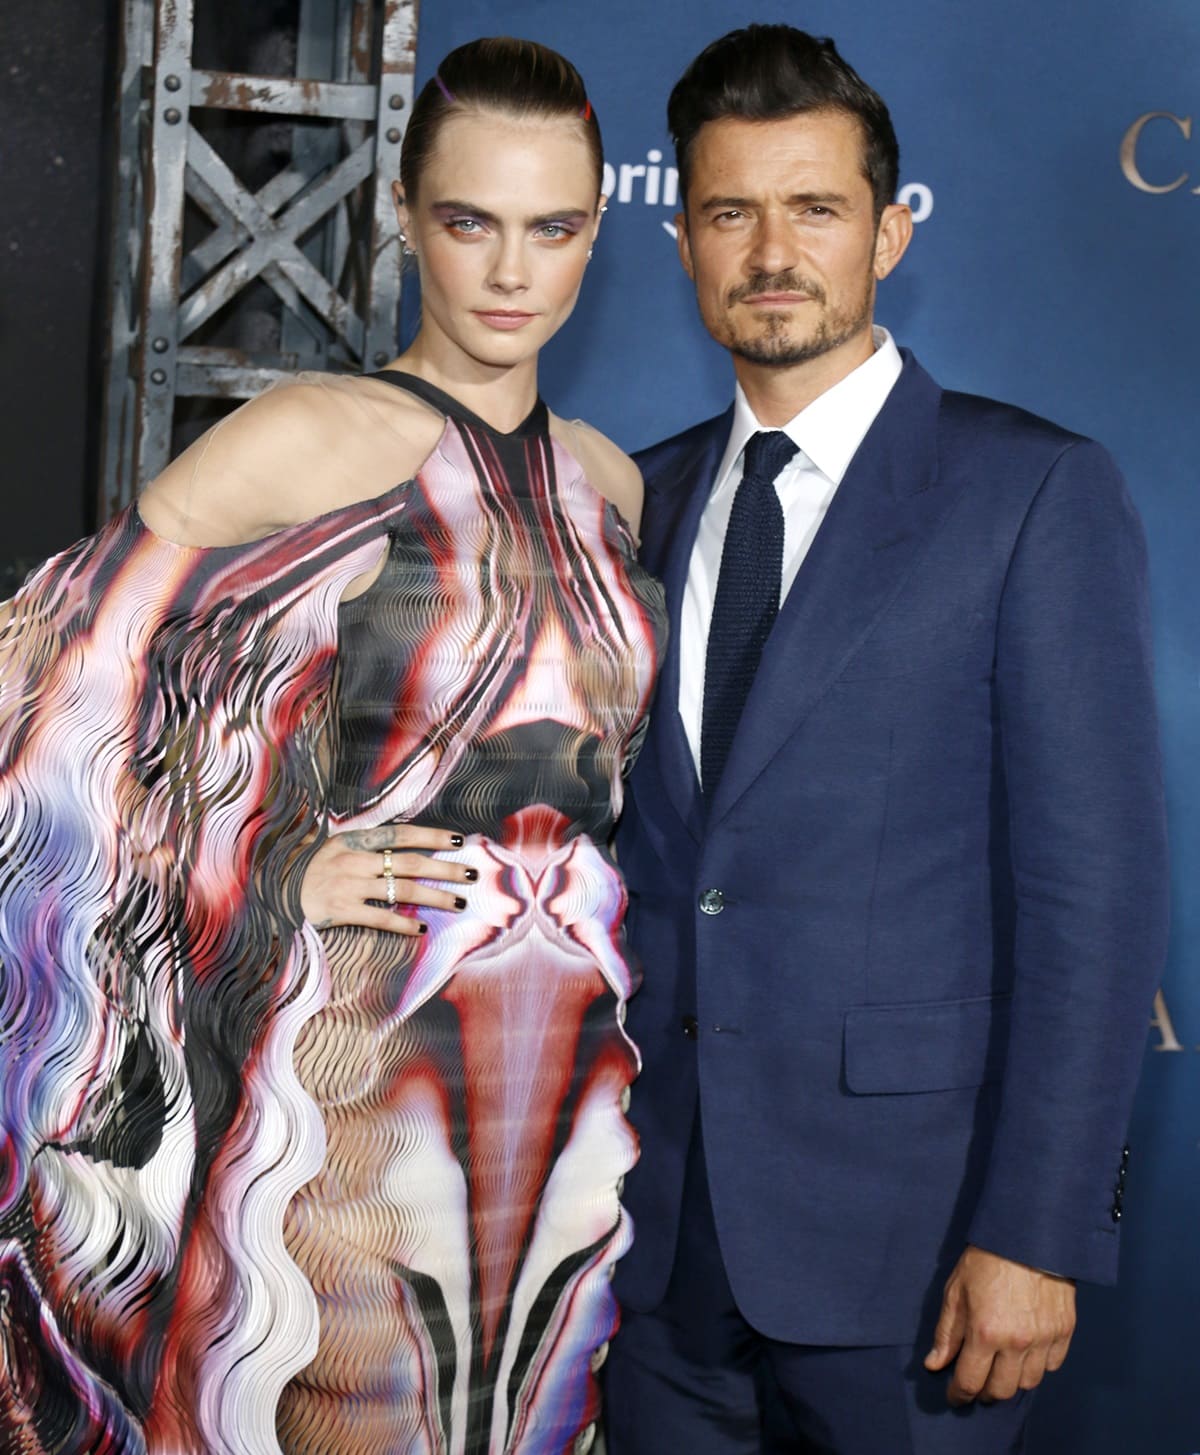 Cara Delevingne's height is 5ft 7 ¼ (170.8 cm), while Orlando Bloom's height is 5ft 10 ½ (179.1 cm)